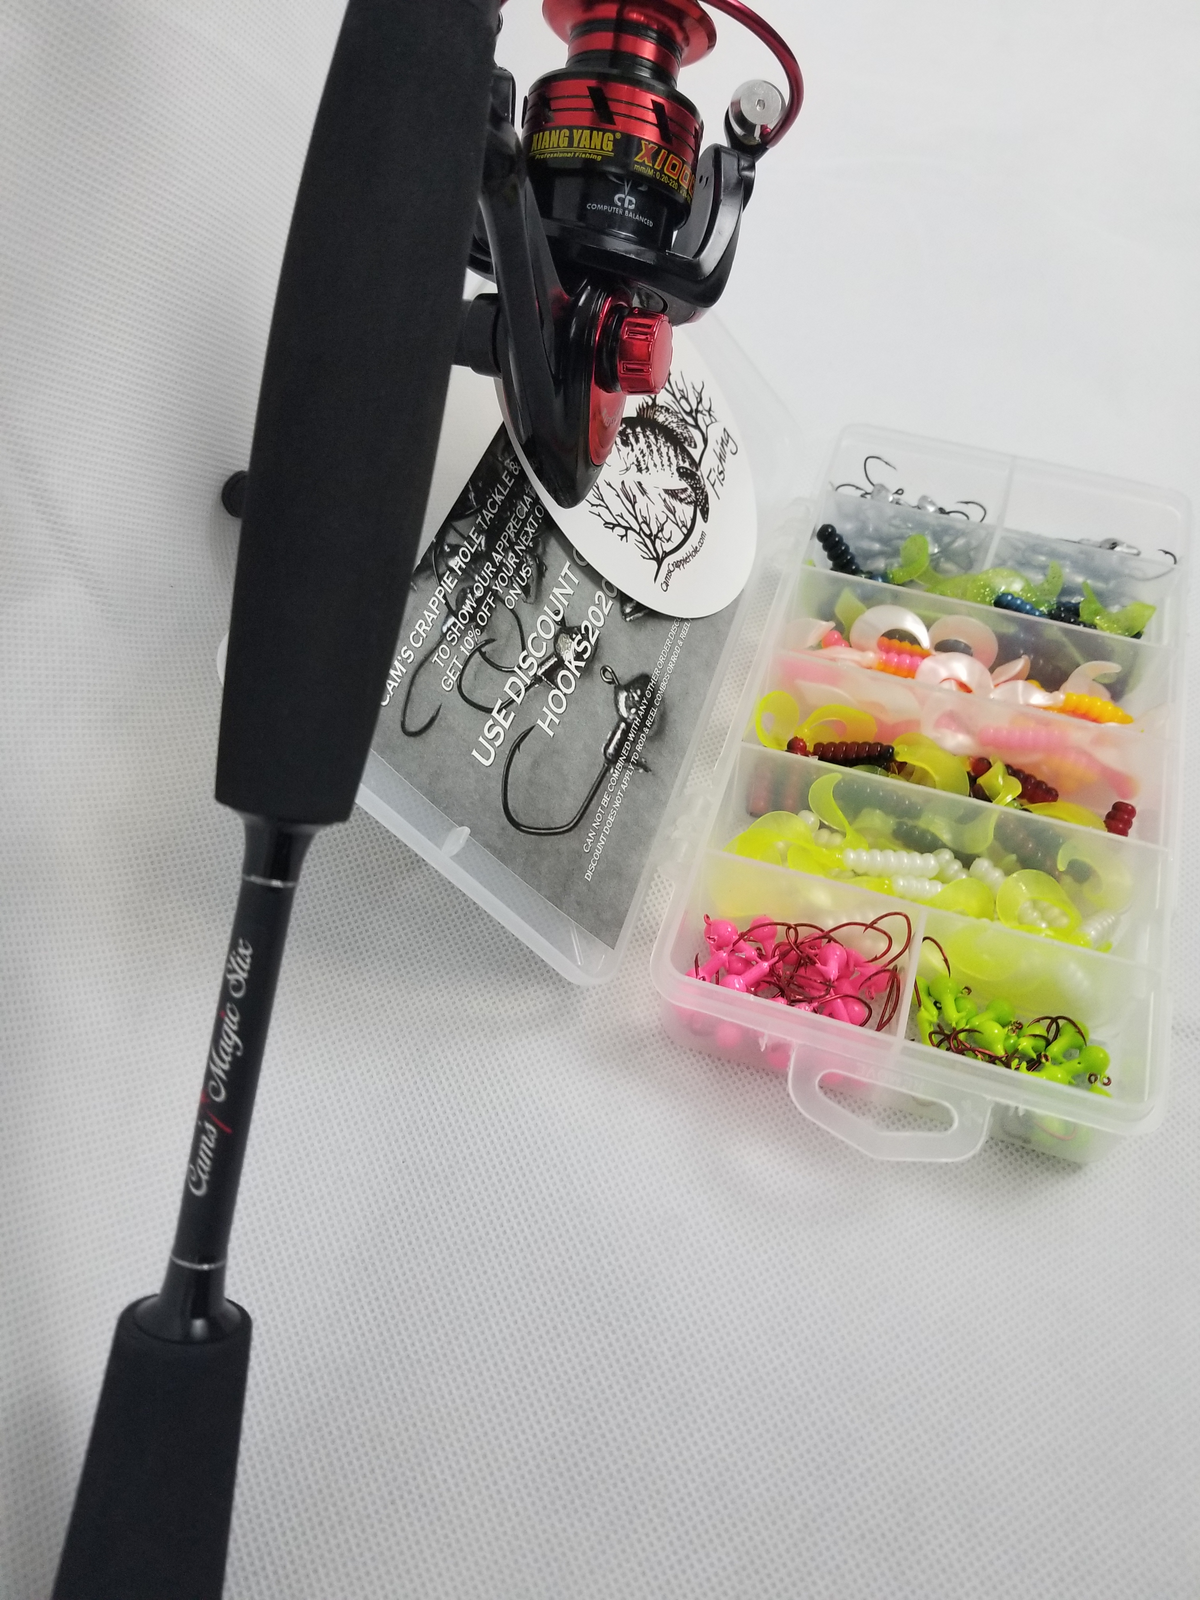 Cam's Complete 6'6" (8+1 BB Ball Bearing Reel) Magic Stix Curly Tail Combo  Special